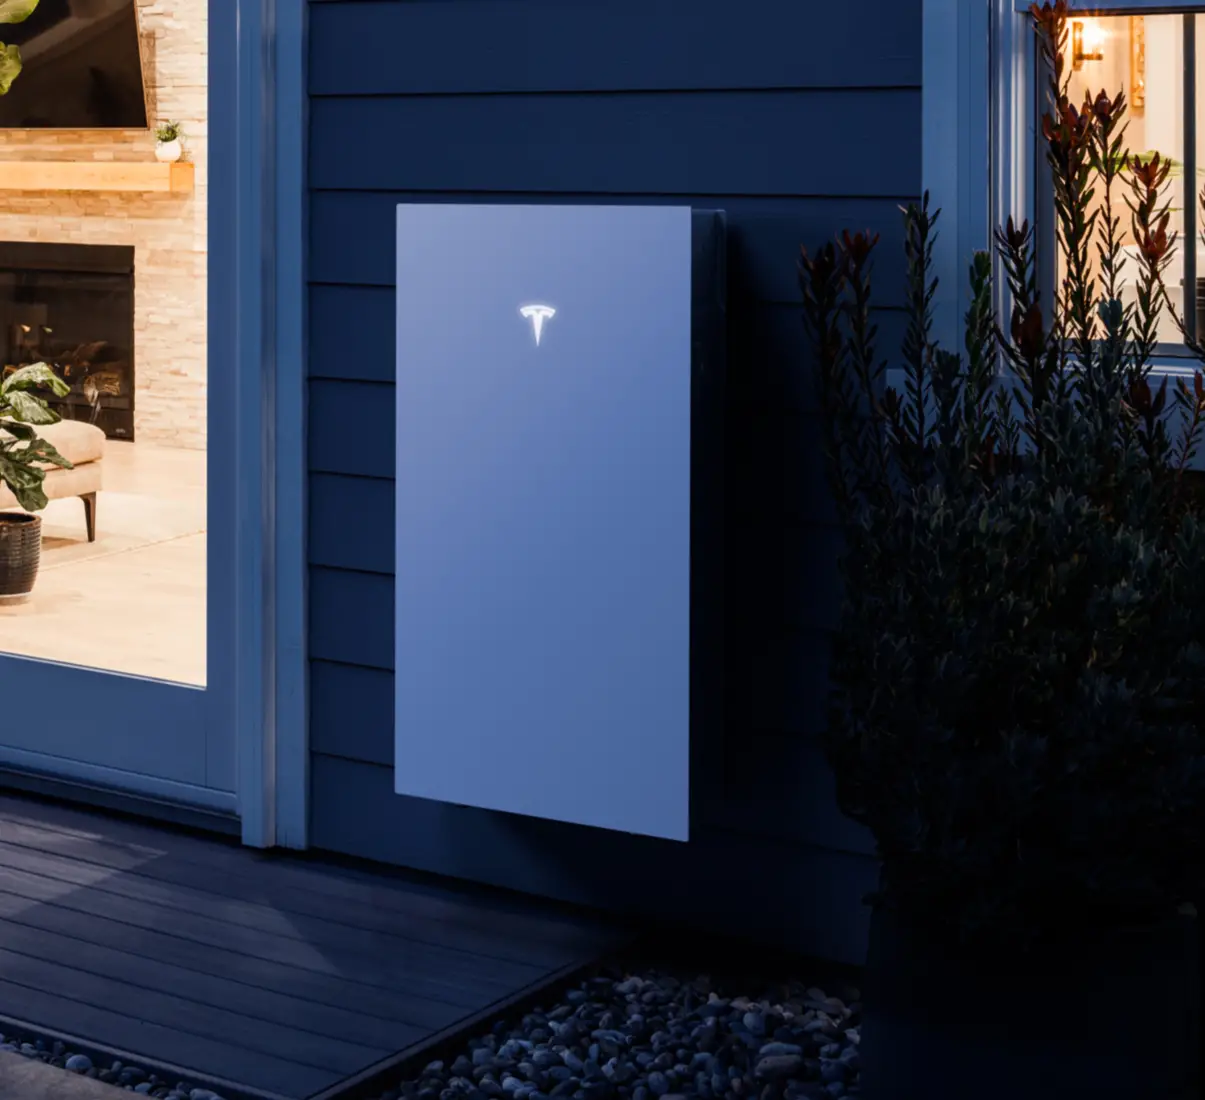 Tesla Powerwall 3 installed on a home by Semper Solaris